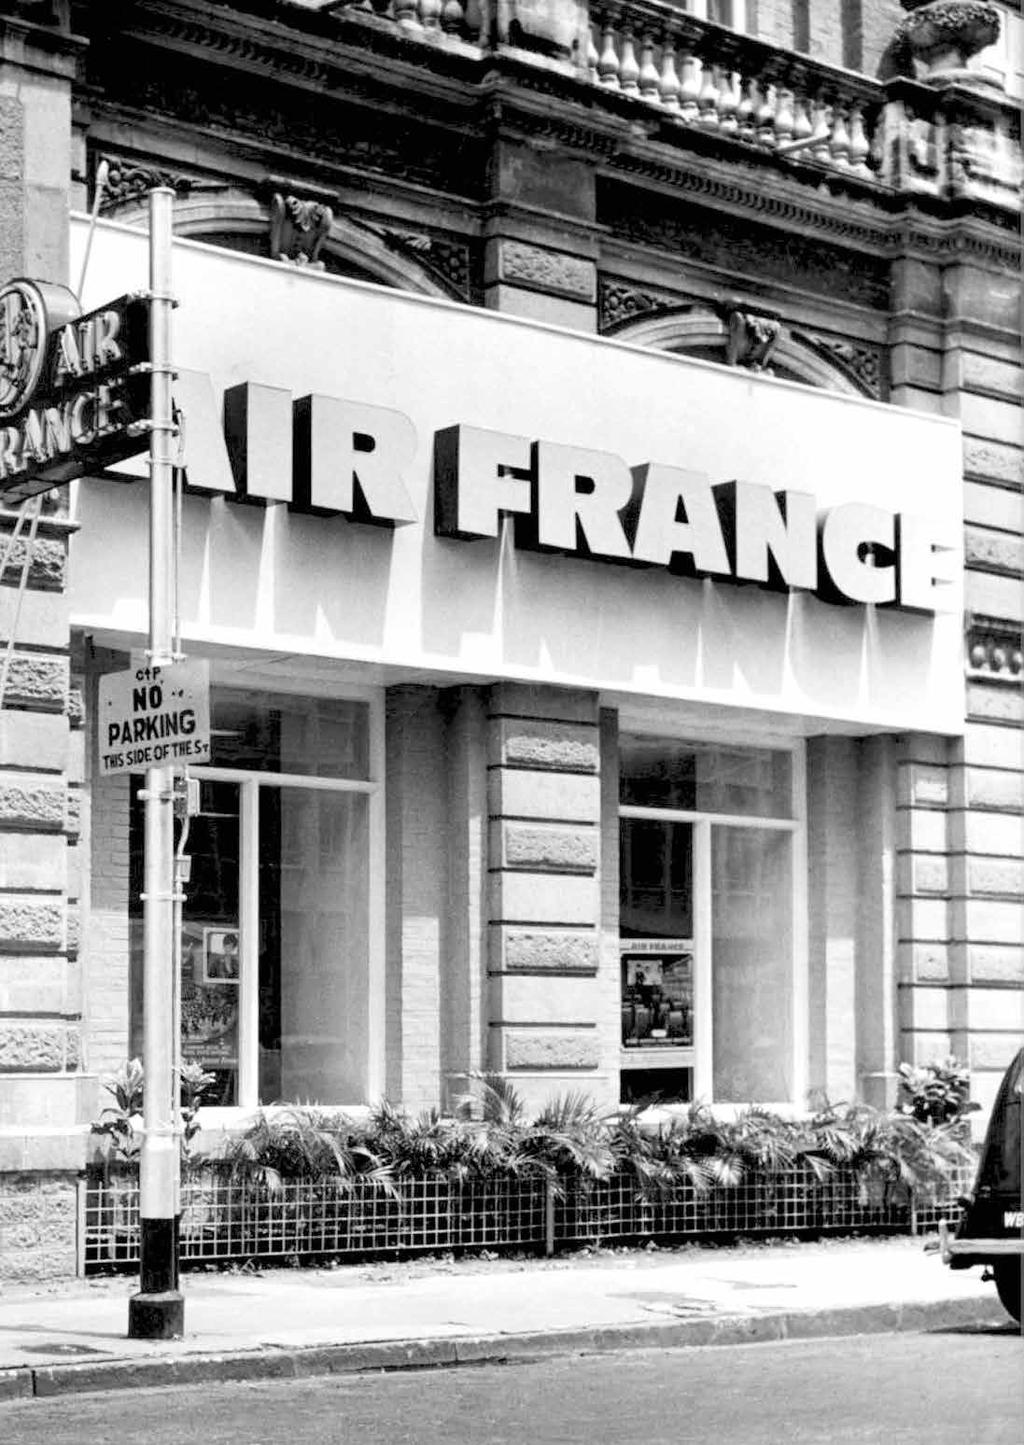 Air France-KLM and India: a shared history In 1929, KLM began serving Calcutta on the Amsterdam-Batavia route, the world s longest air route at the time.